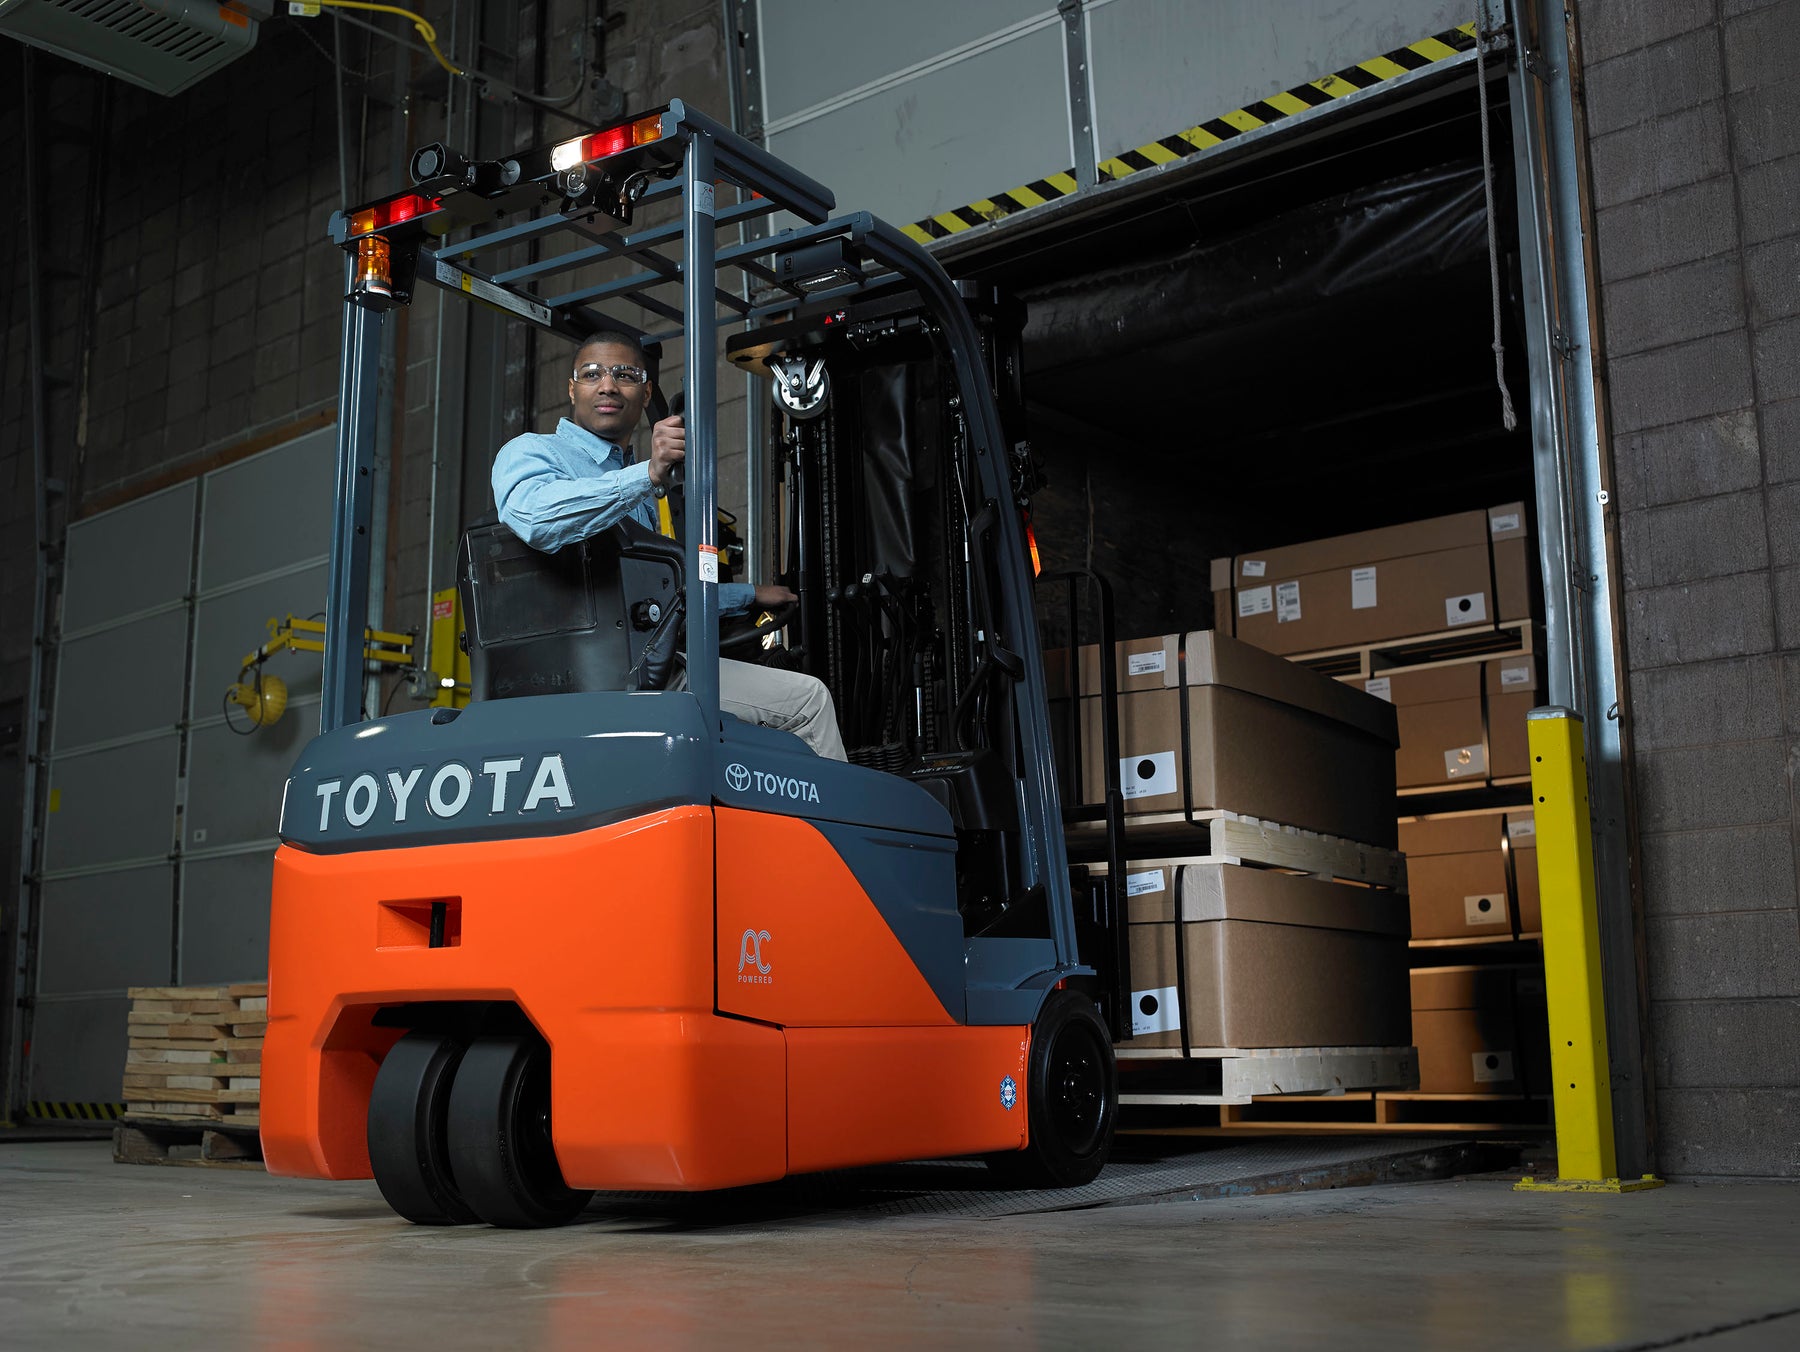 Lift Truck Safety: Not To Be Taken Lightly